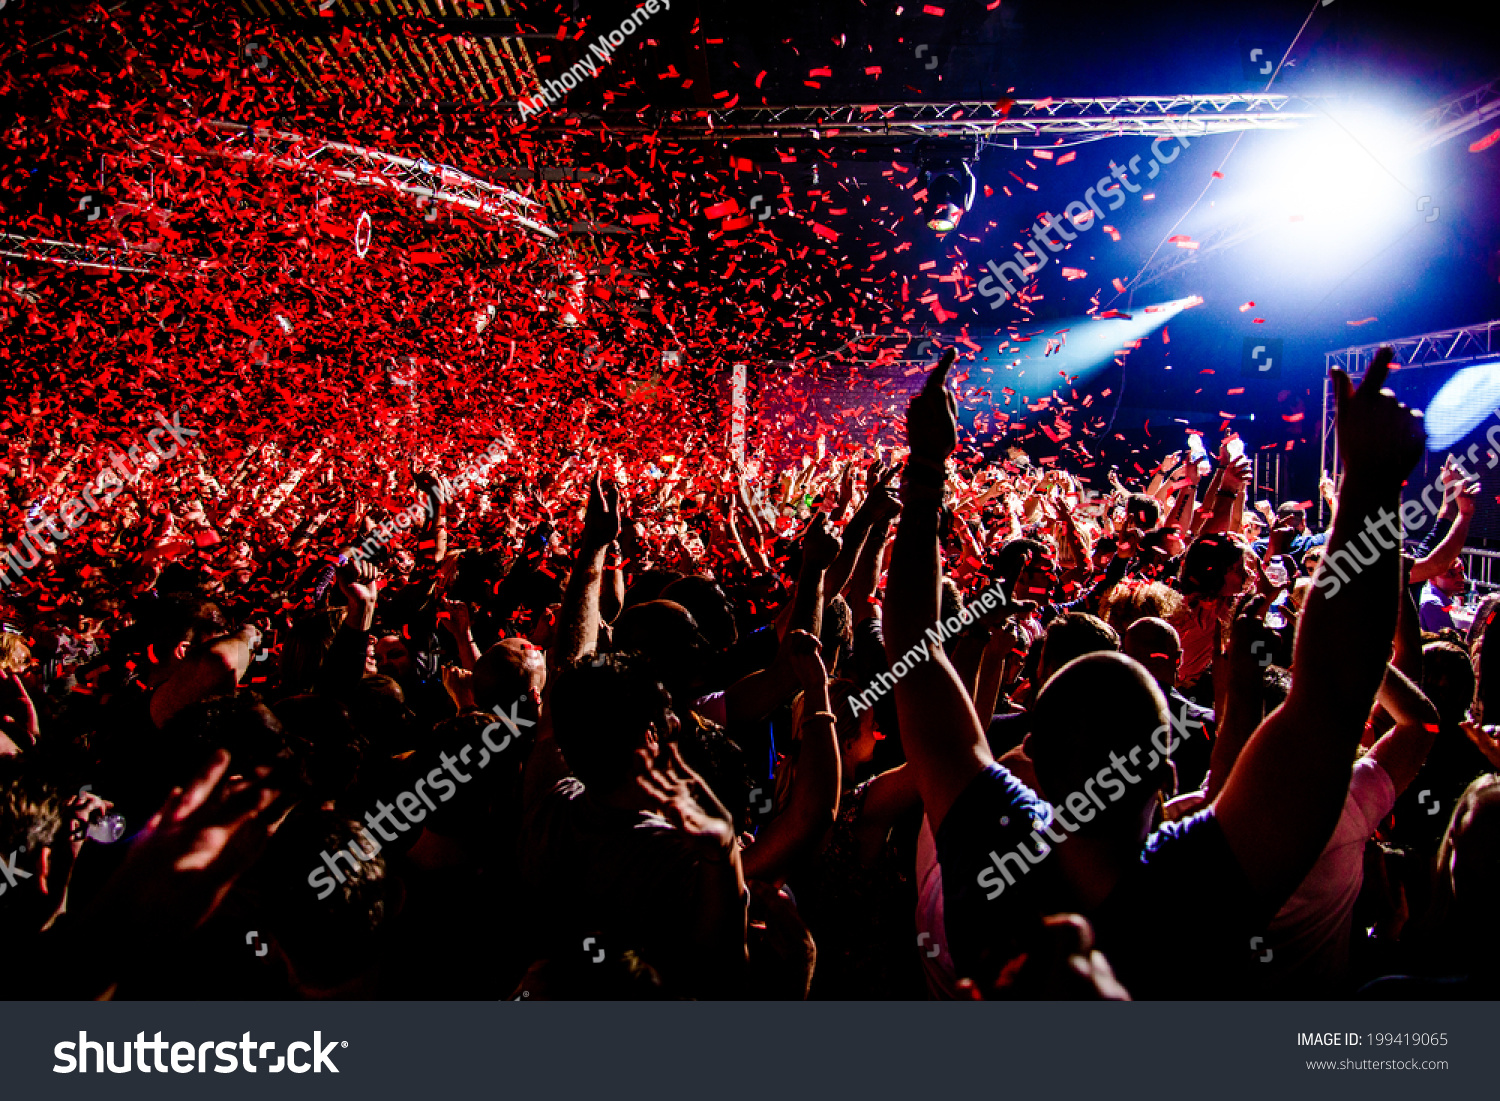 Nightclub party clubbers with hands in air and red confetti #199419065